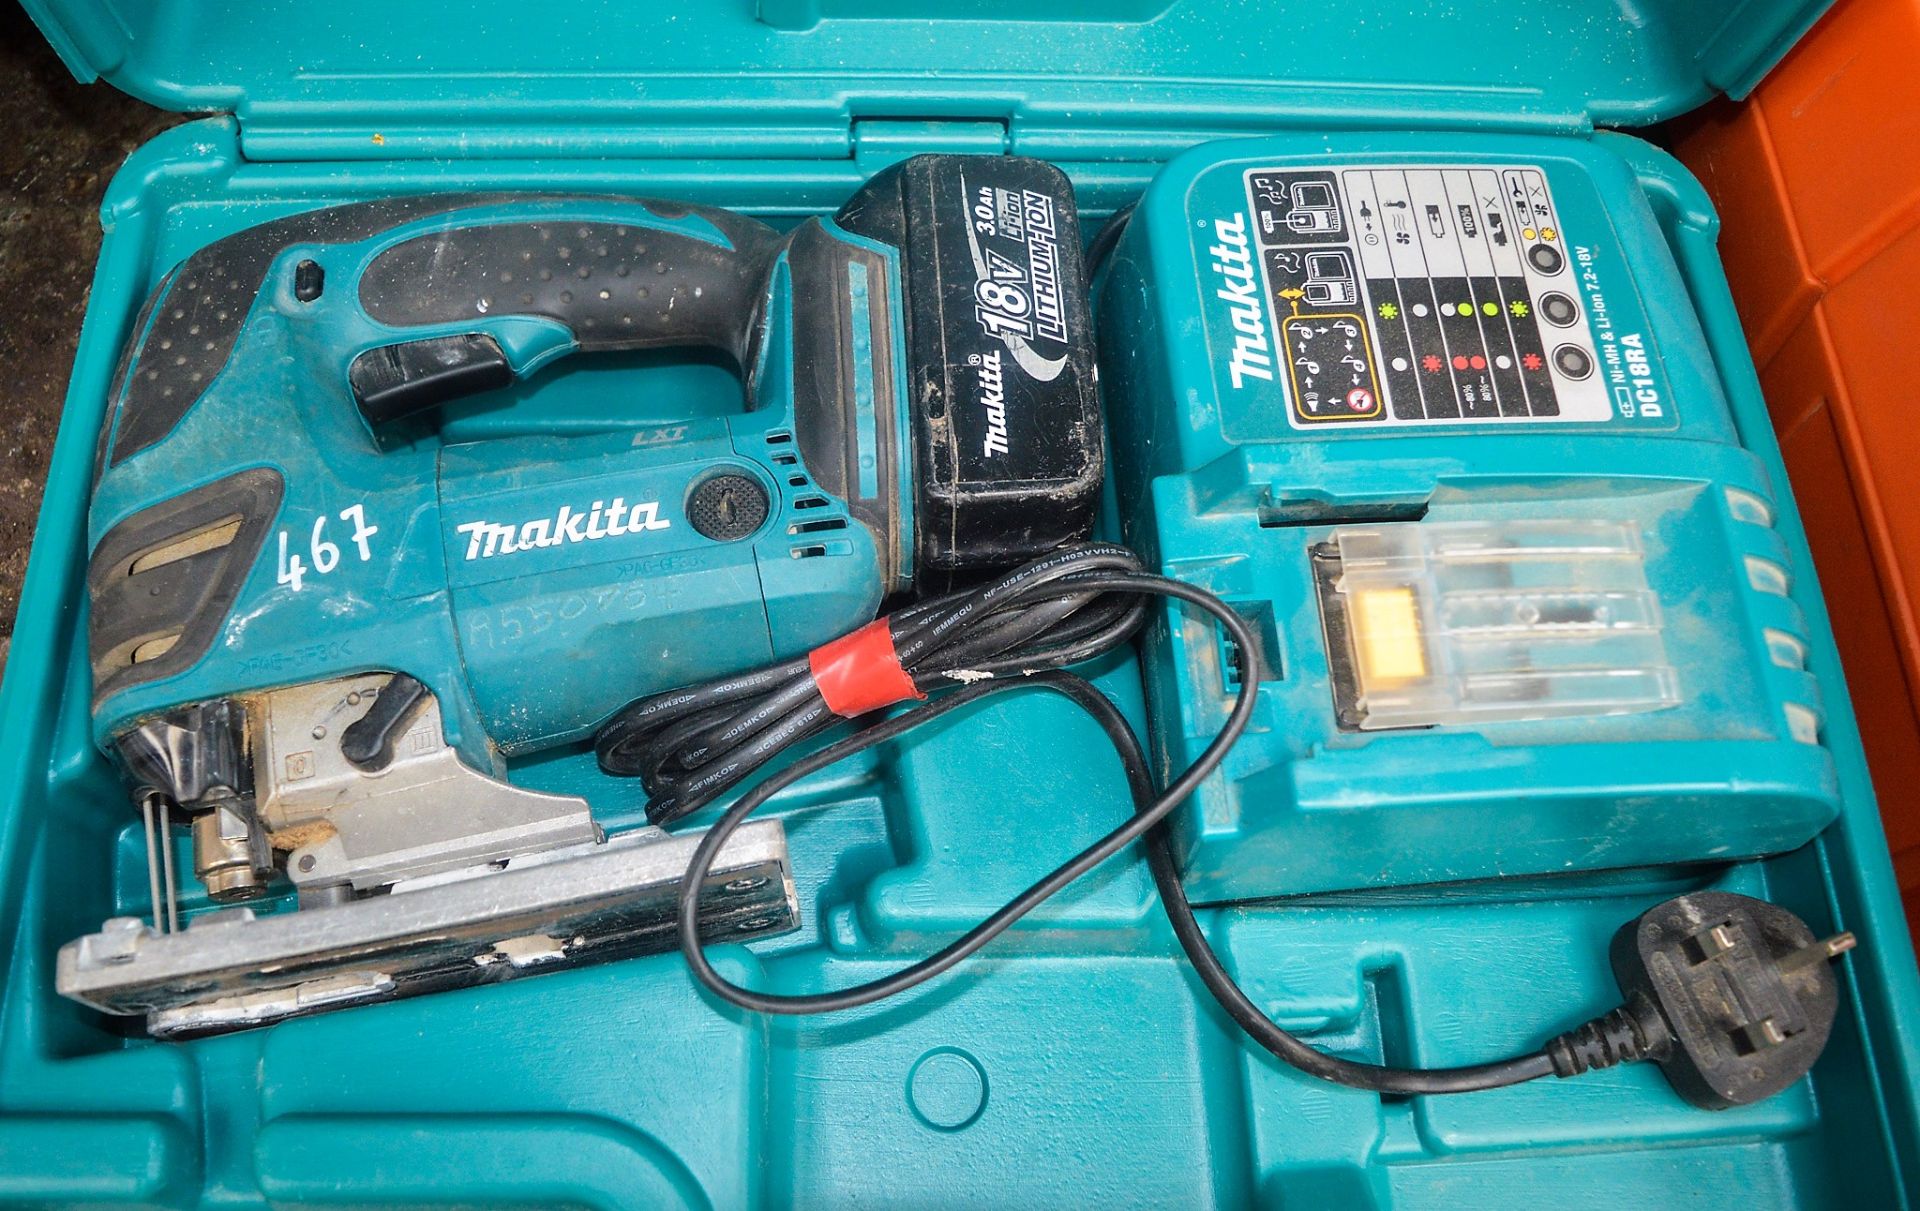 Makita 18v cordless jigsaw c/w charger, battery & carry case A550754